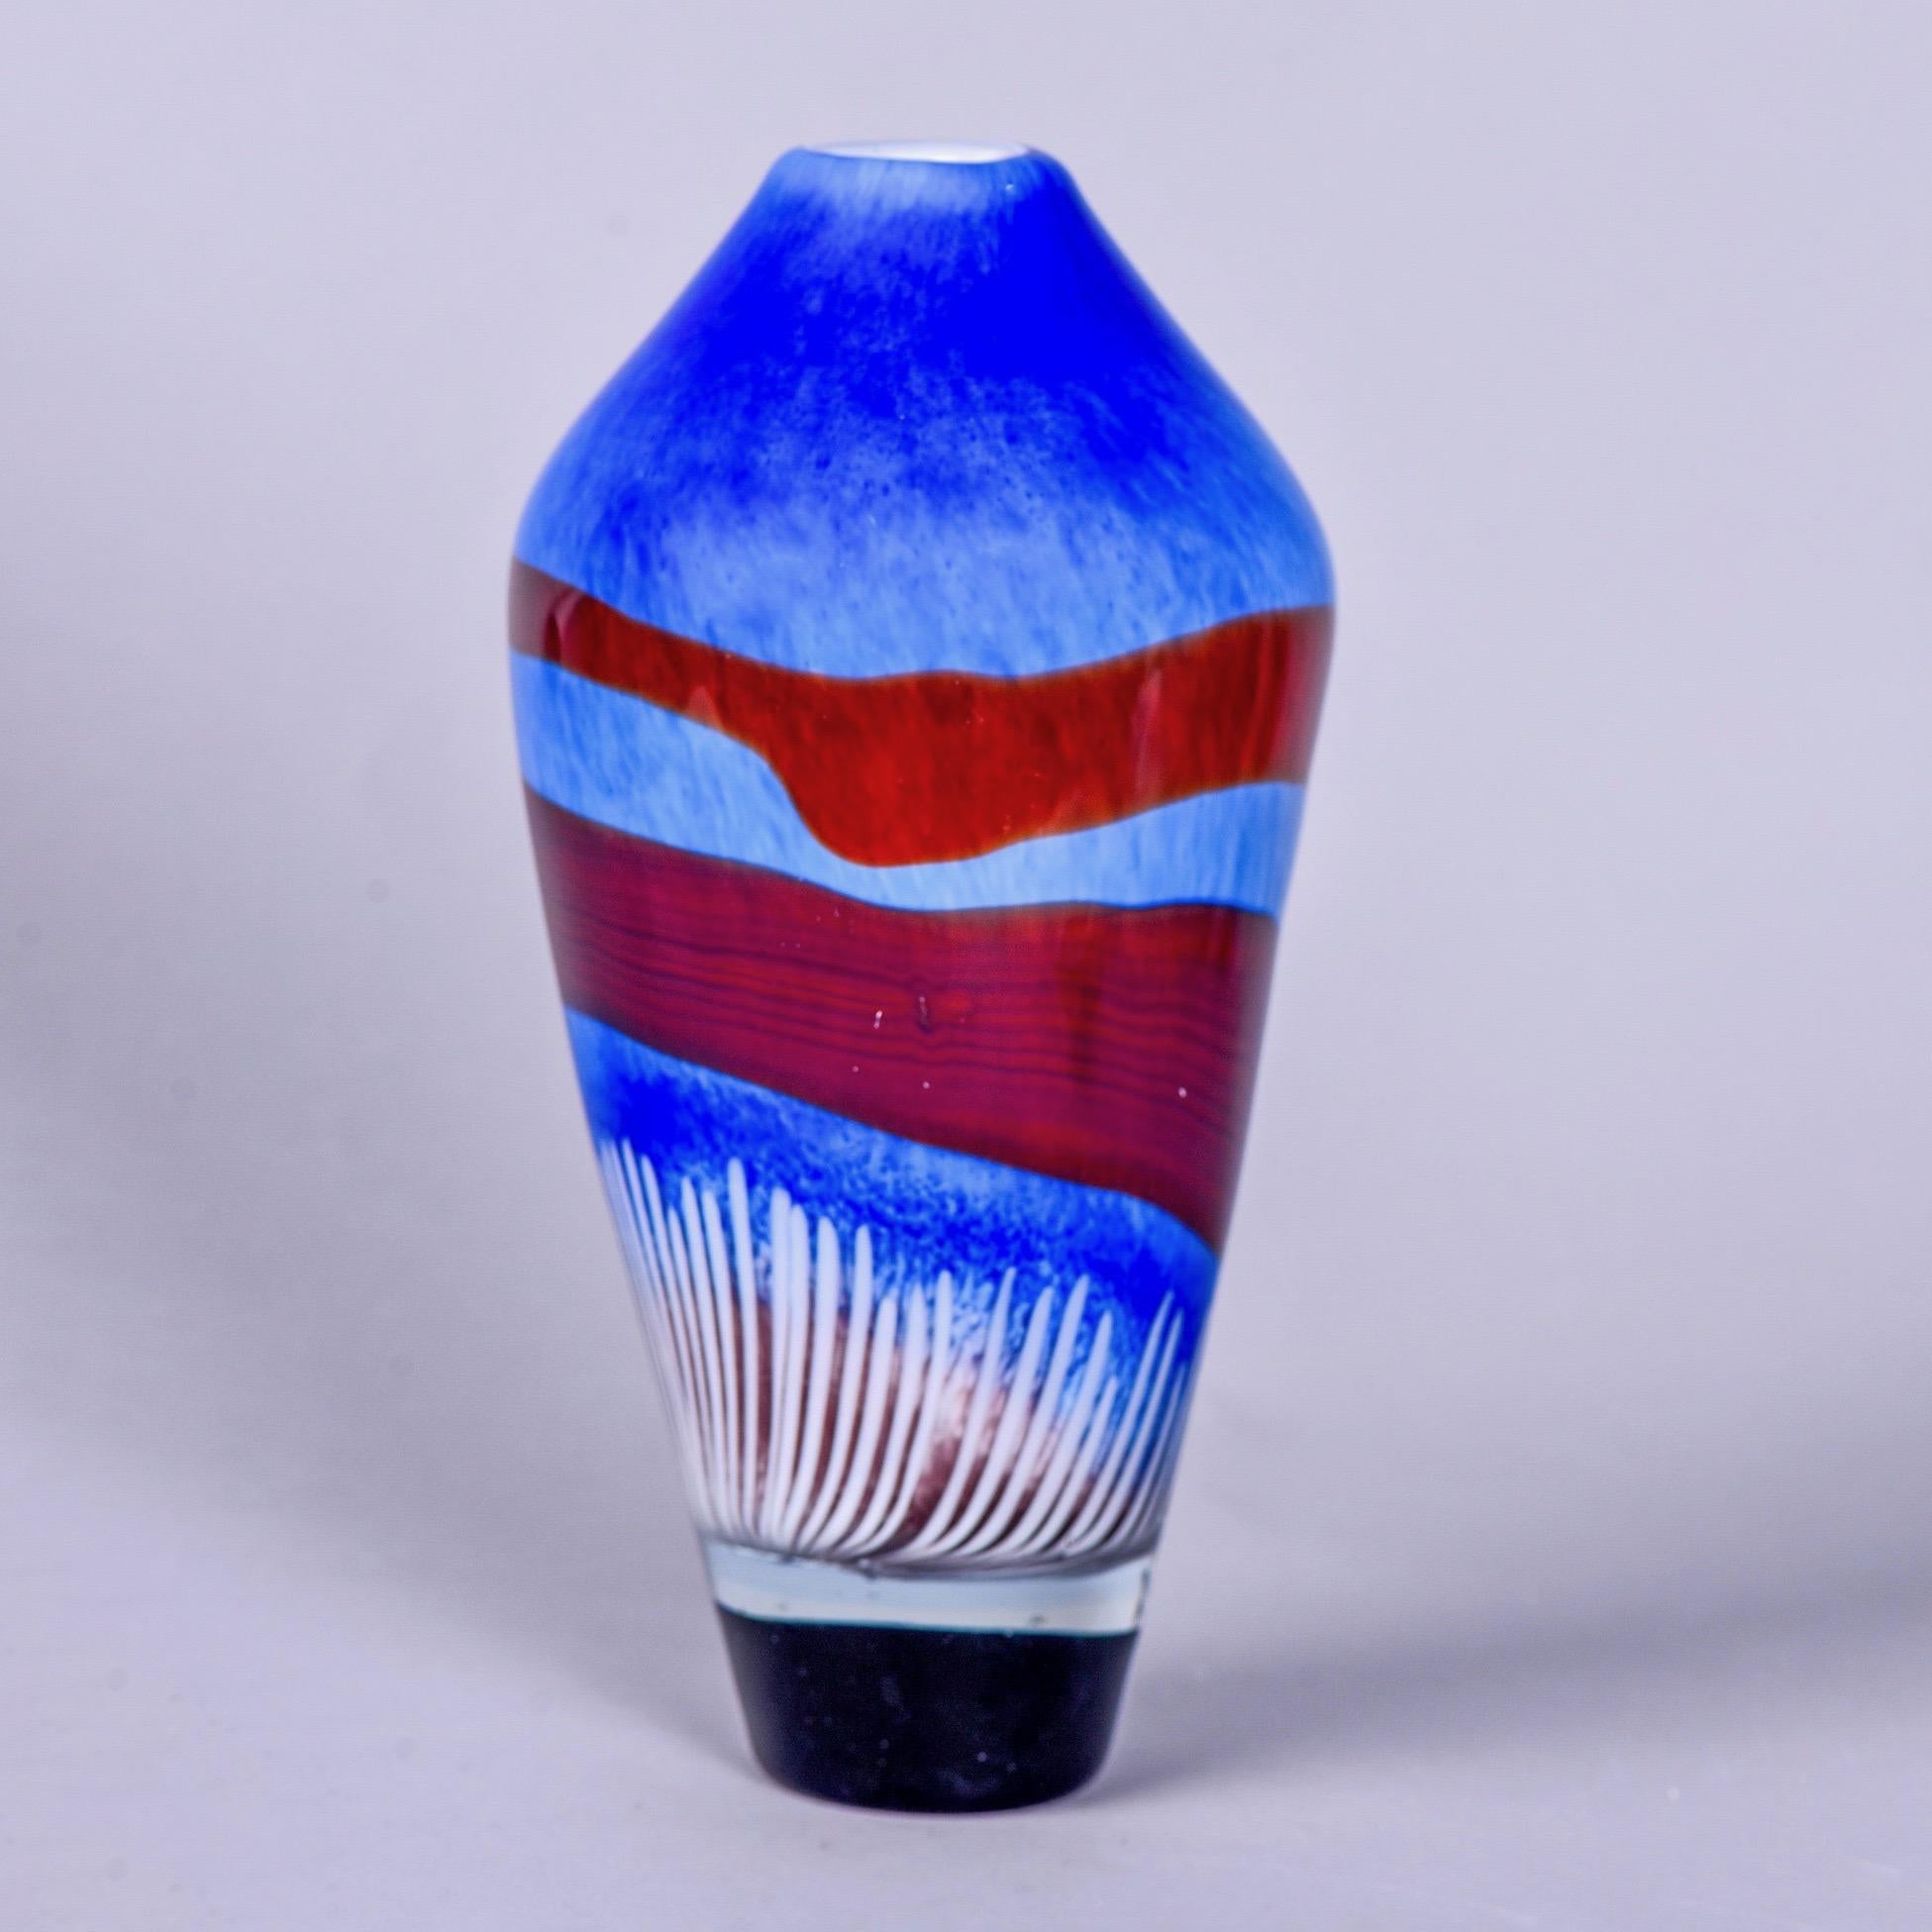 Just under a foot high, this Murano glass vase in azure blue has a deep blue base, wavy bands of burgundy red and white accents. Unknown Murano maker.